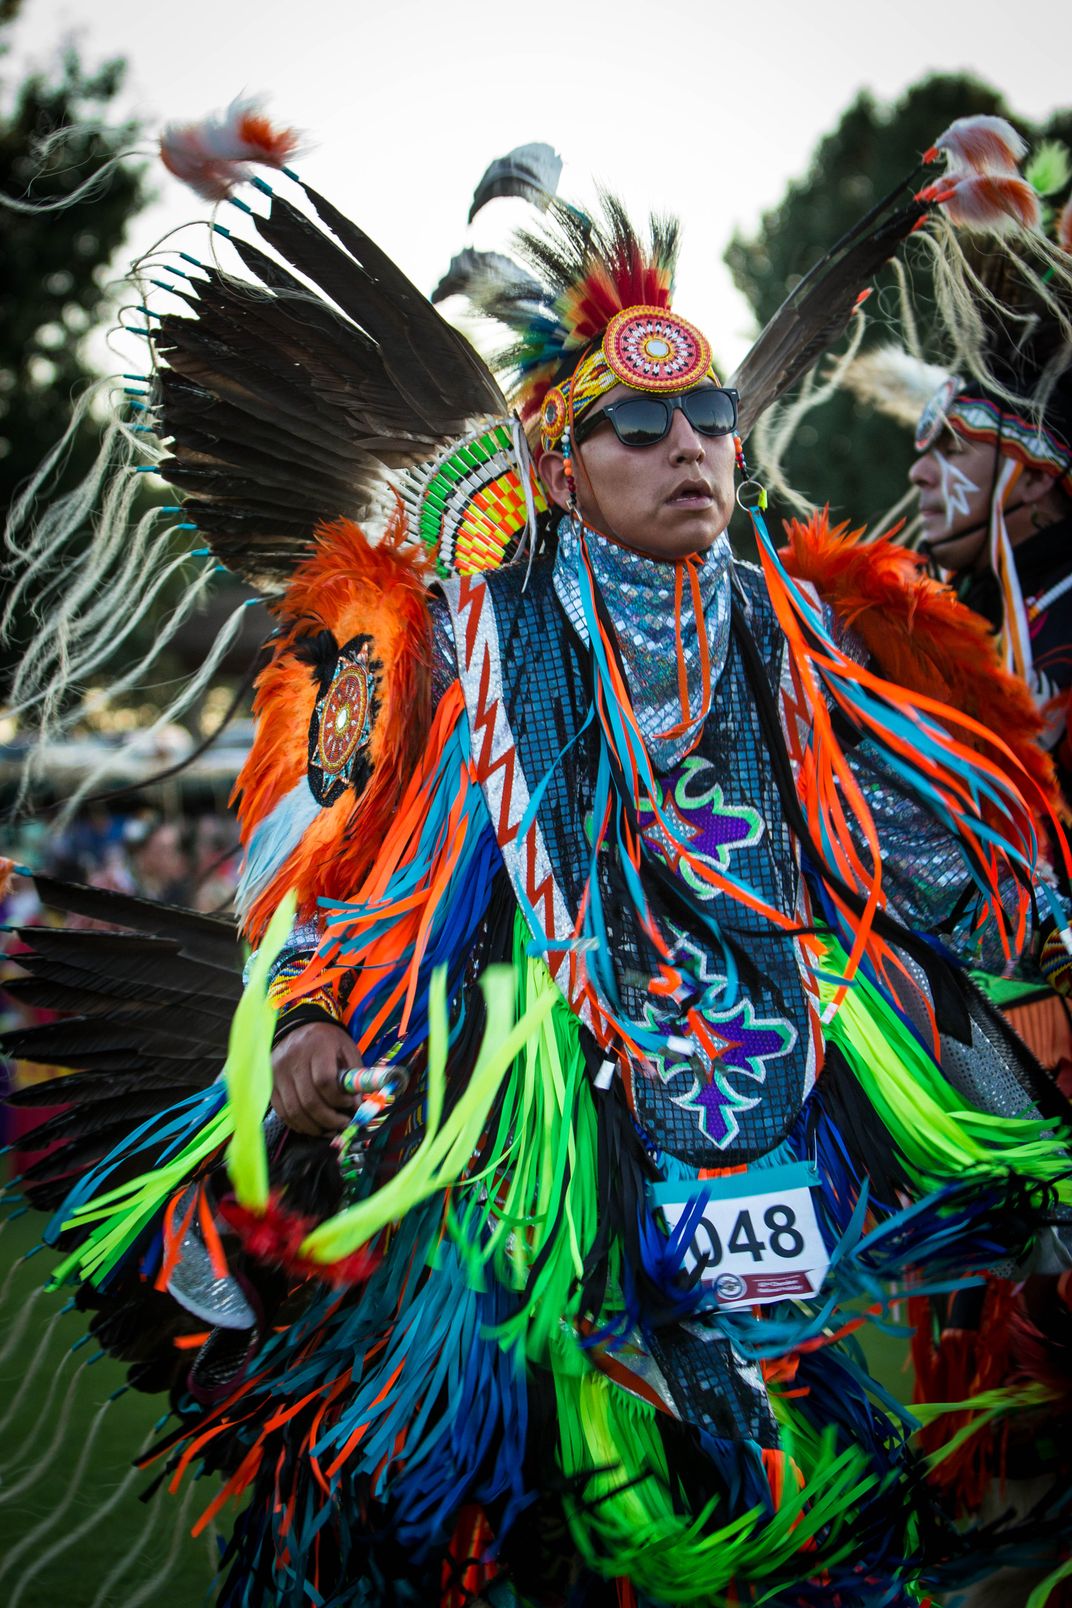 a Native dancer in colorful outfit and head dress